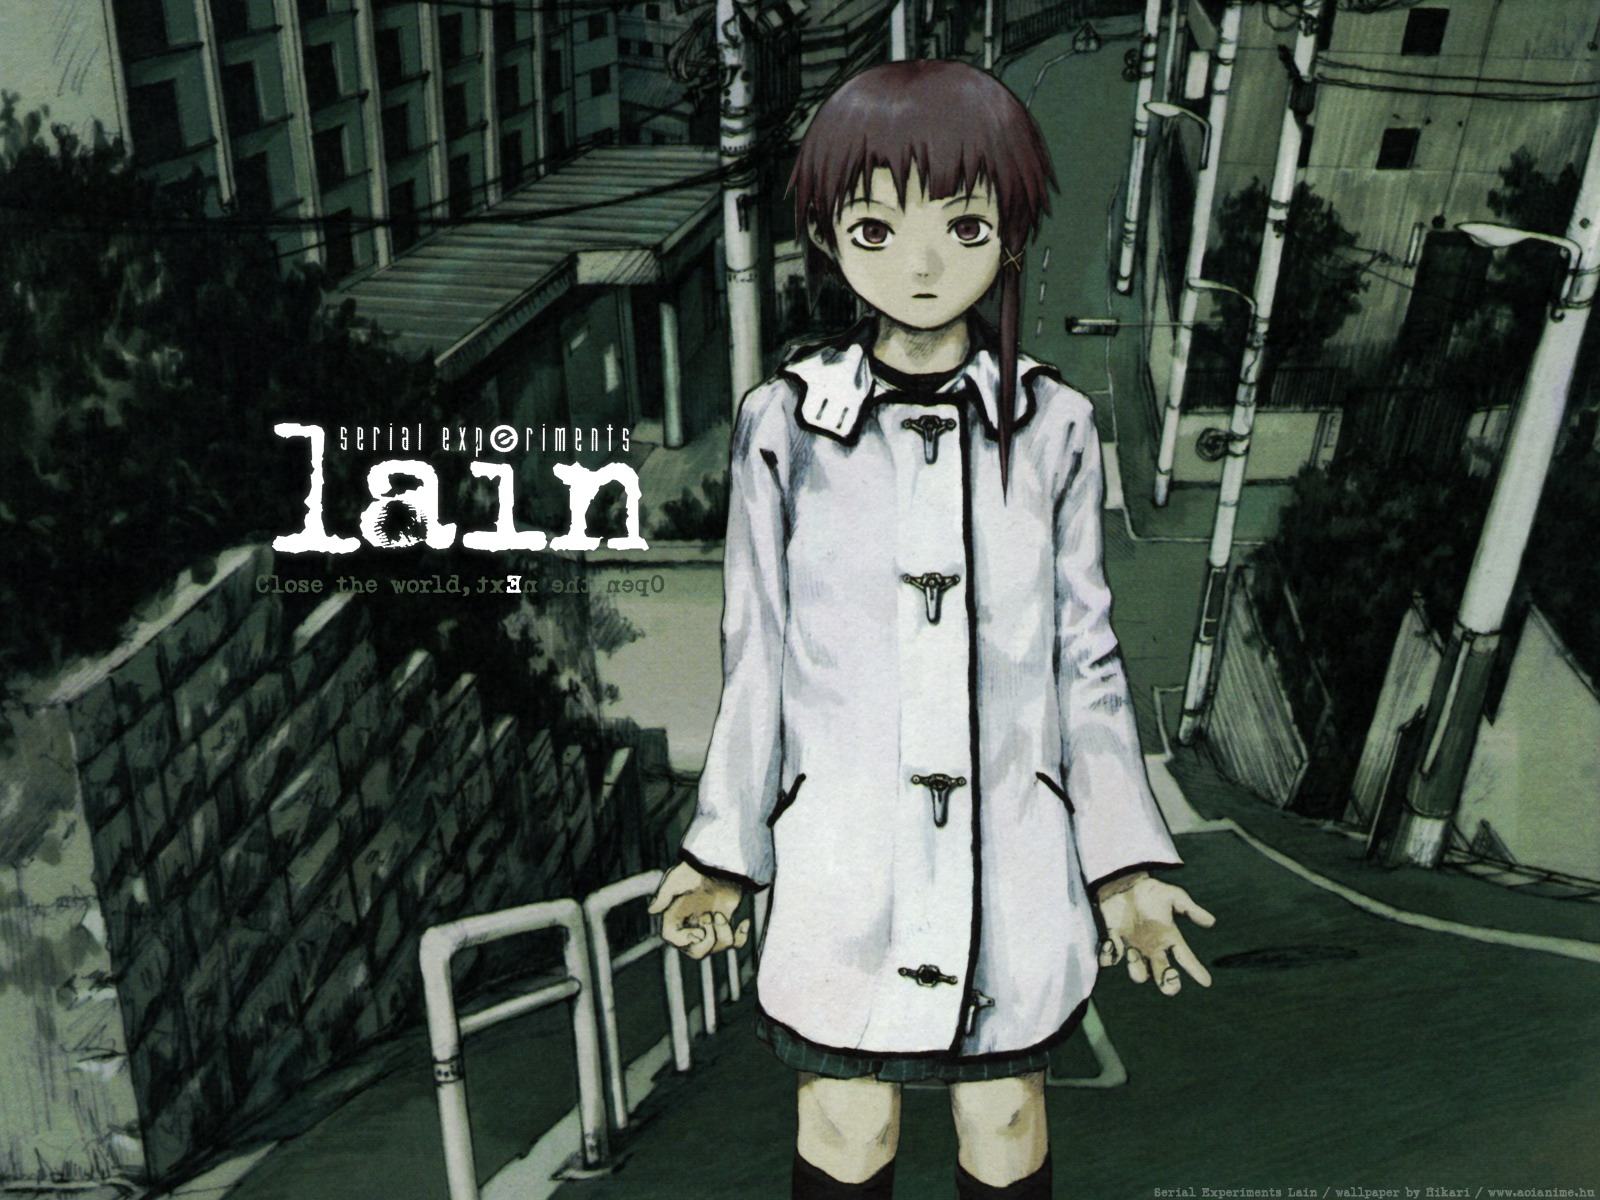 Serial Experiments Lain Dystopian Truth